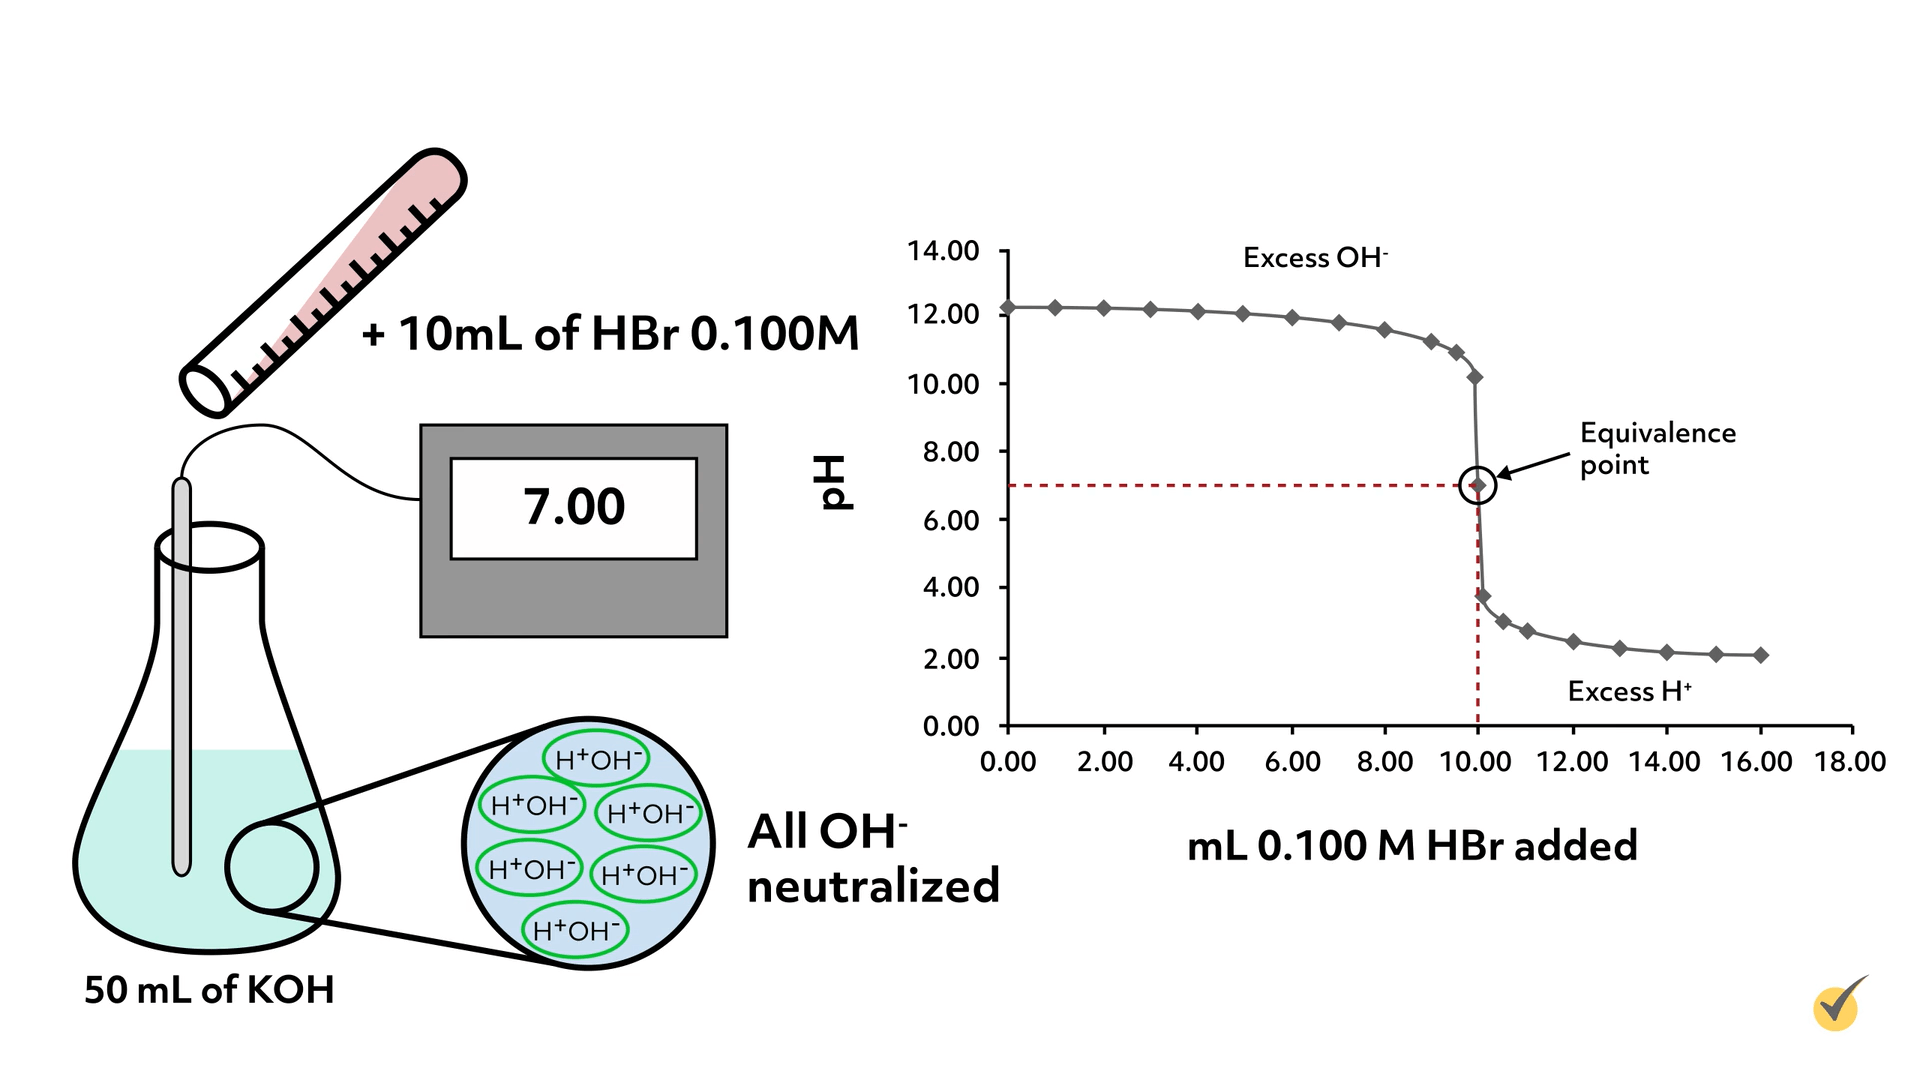 Image of a graph showing the dropping levels of PH when adding +10 mL of HBr 0.100M